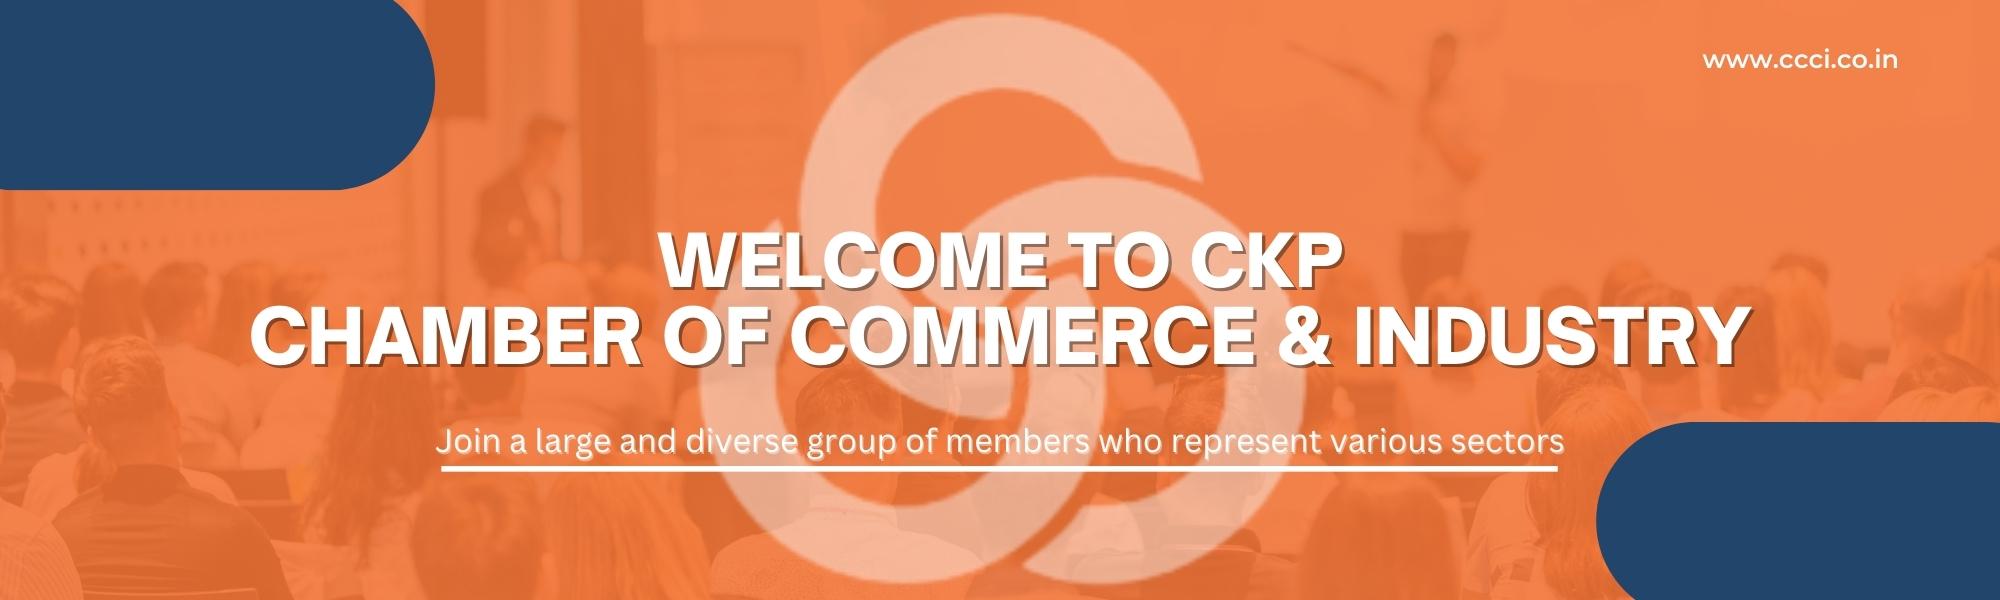 Welcome to Indian Chamber of Commerce (2000 × 600px)